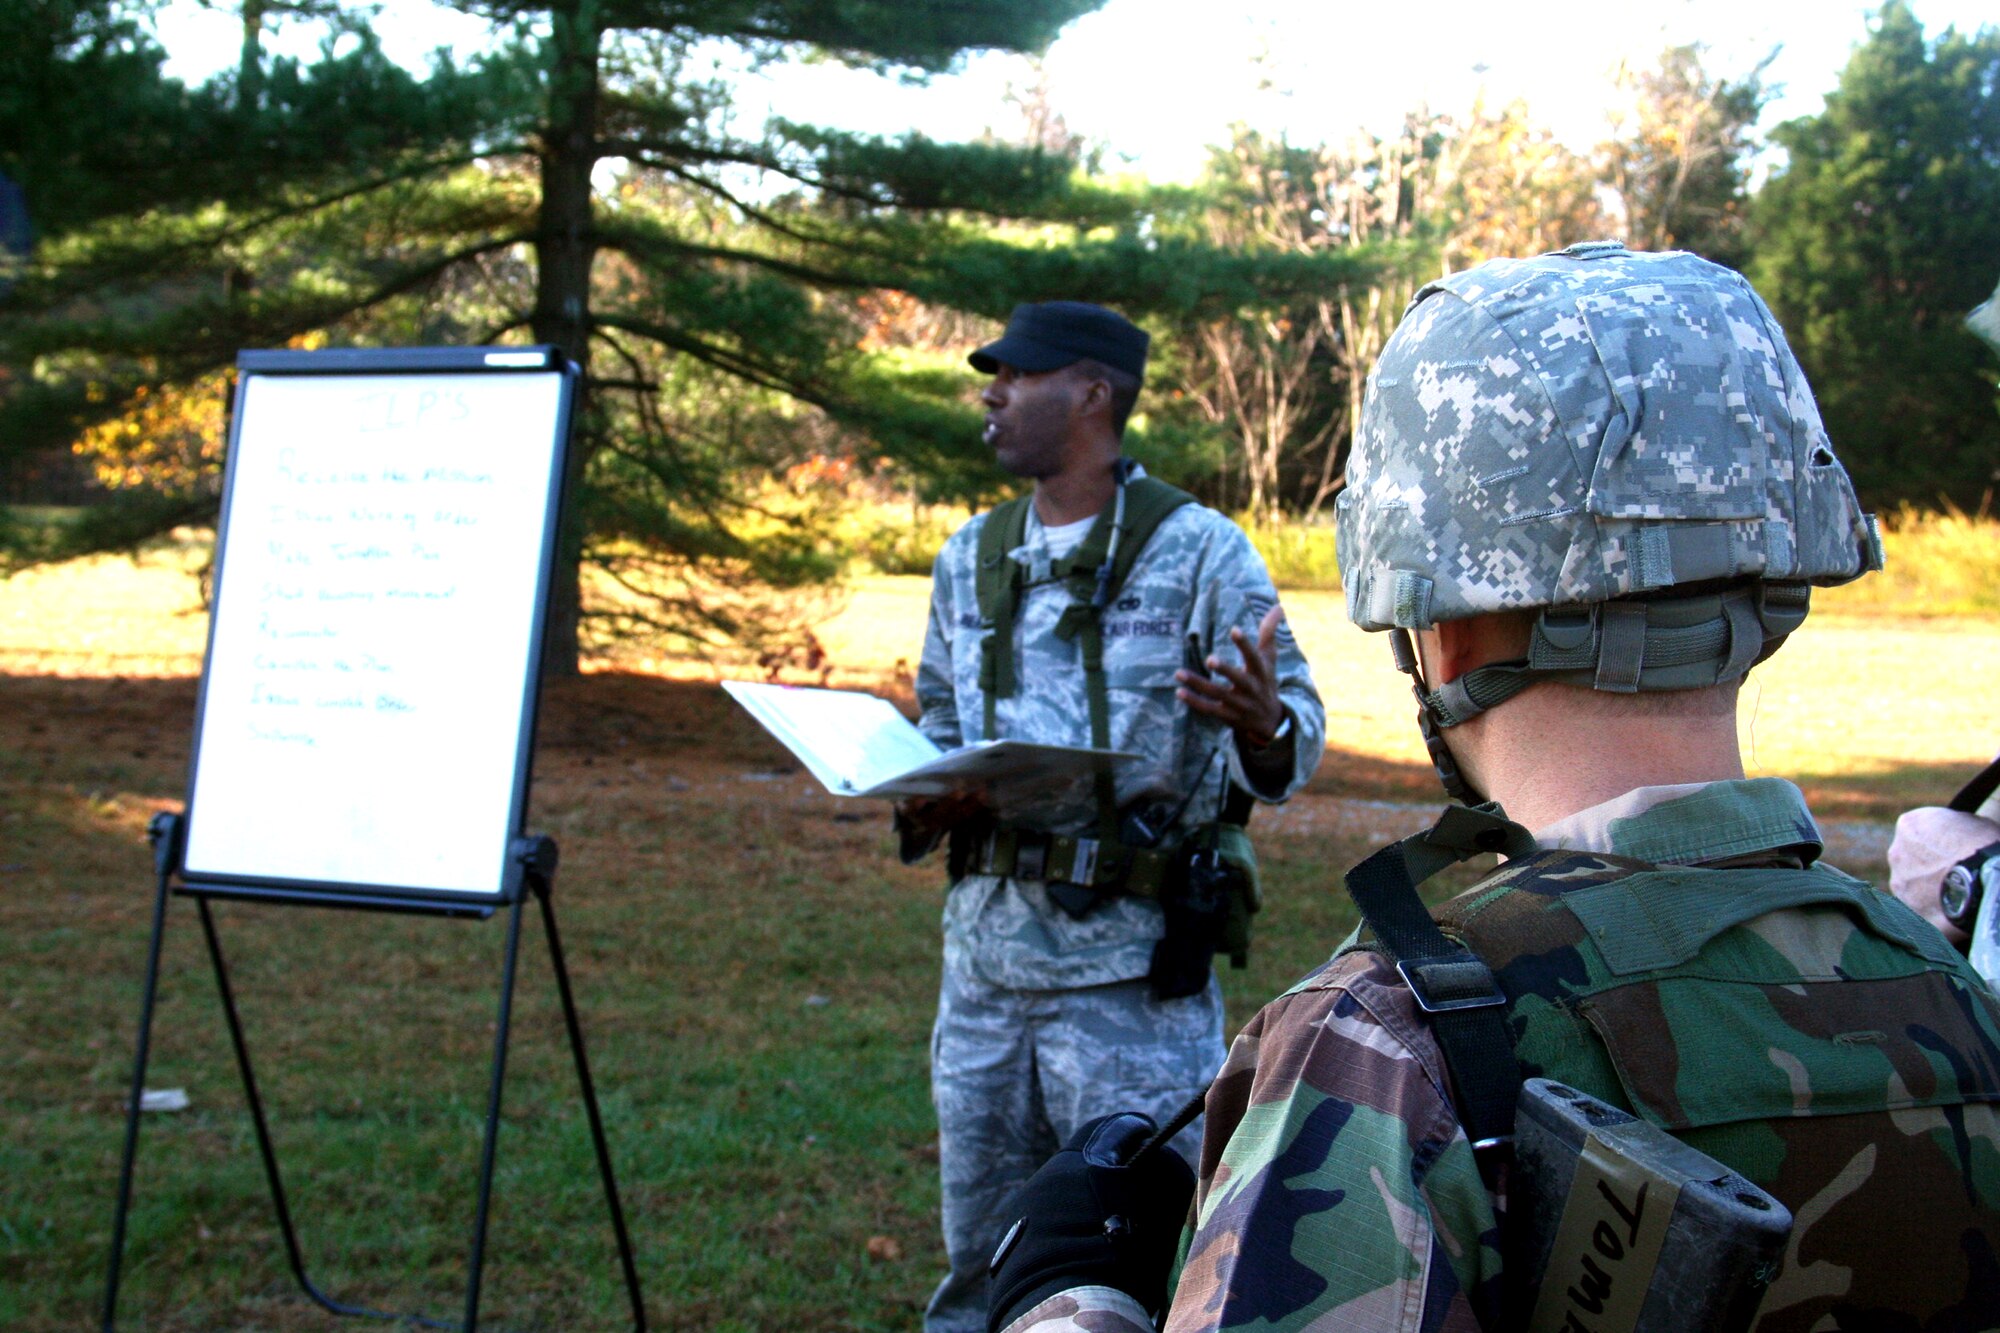 Tech. Sgt. Terry Bean, combat skills instructor, provides a briefing to students in the Combat Airman Skills Training Course 10-1A during tactics training in the course on Nov. 4, 2009, at Joint Base McGuire-Dix-Lakehurst, N.J.  The course, taught by the U.S. Air Force Expeditionary Center's 421st Combat Training Squadron, prepare Airmen for upcoming deployments.  (U.S. Air Force Photo/Tech. Sgt. Scott T. Sturkol)